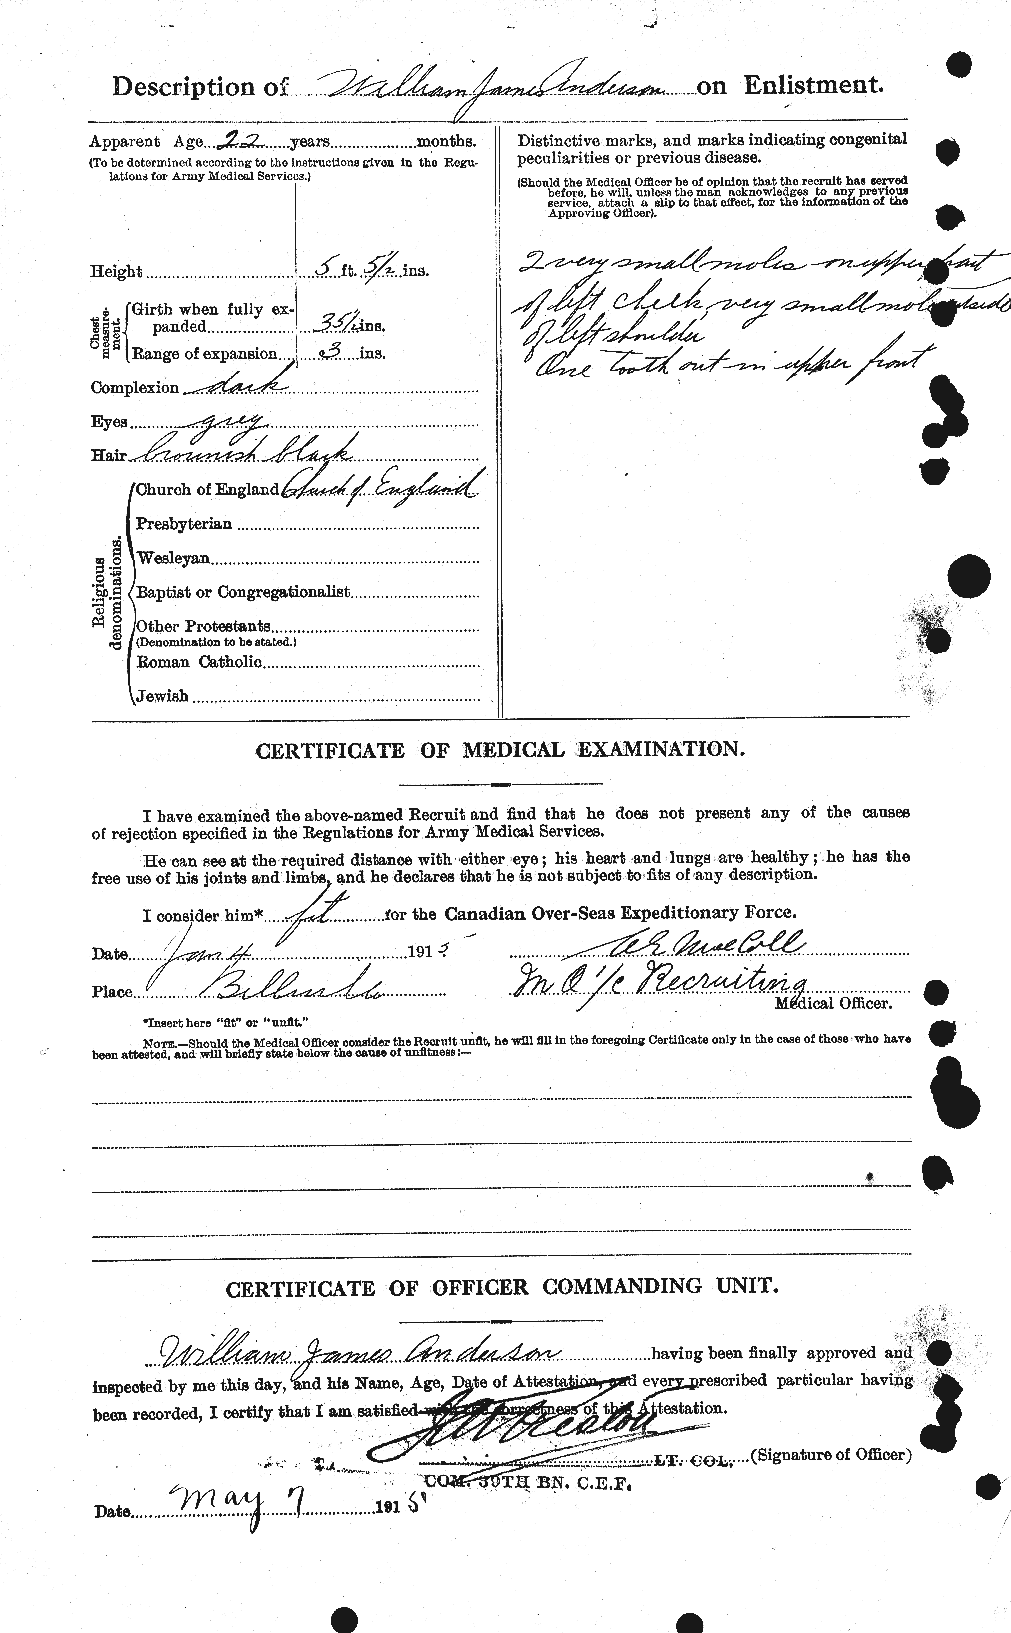 Personnel Records of the First World War - CEF 210813b